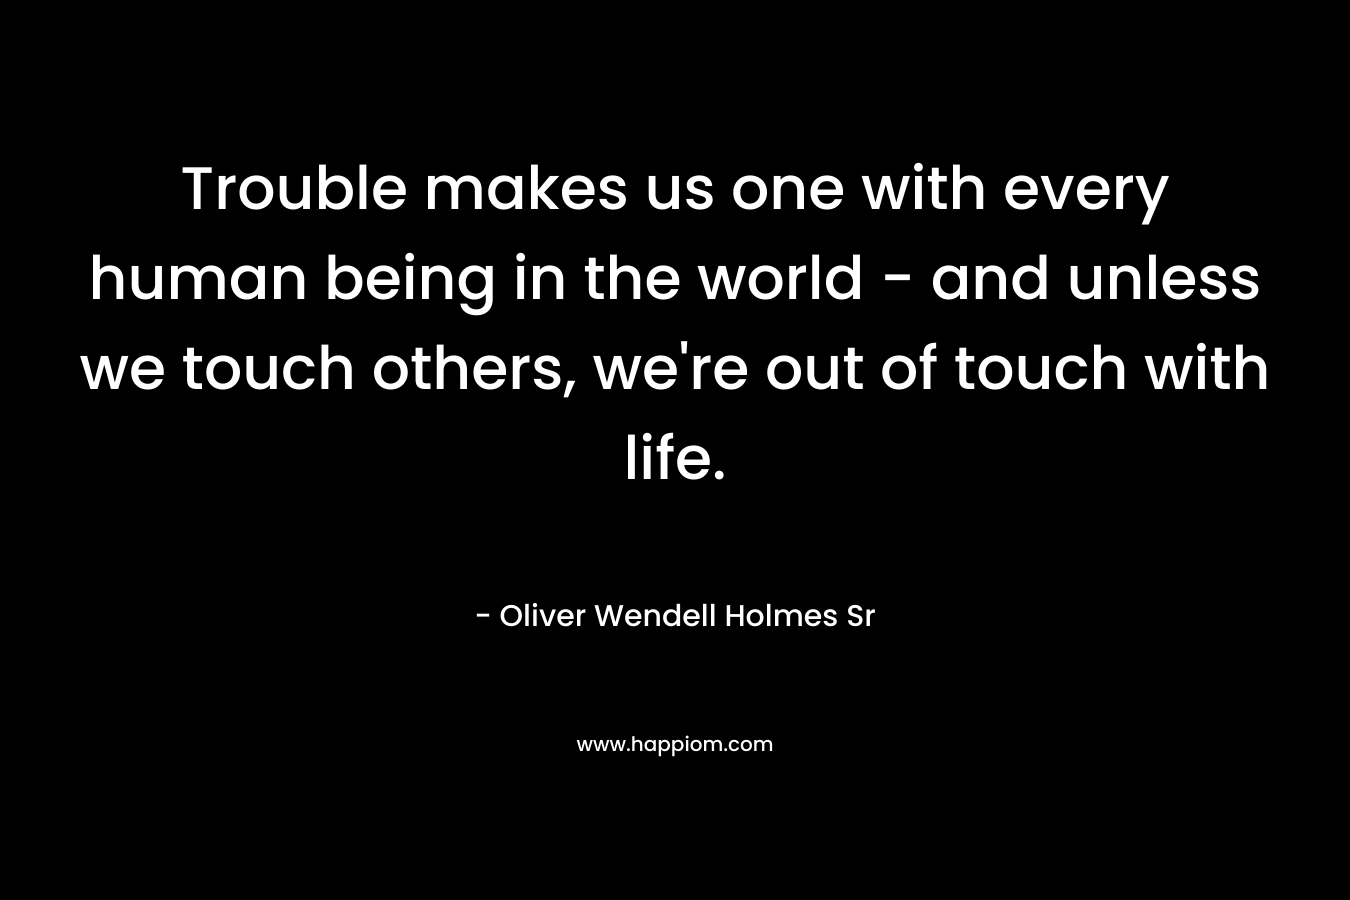 Trouble makes us one with every human being in the world - and unless we touch others, we're out of touch with life.